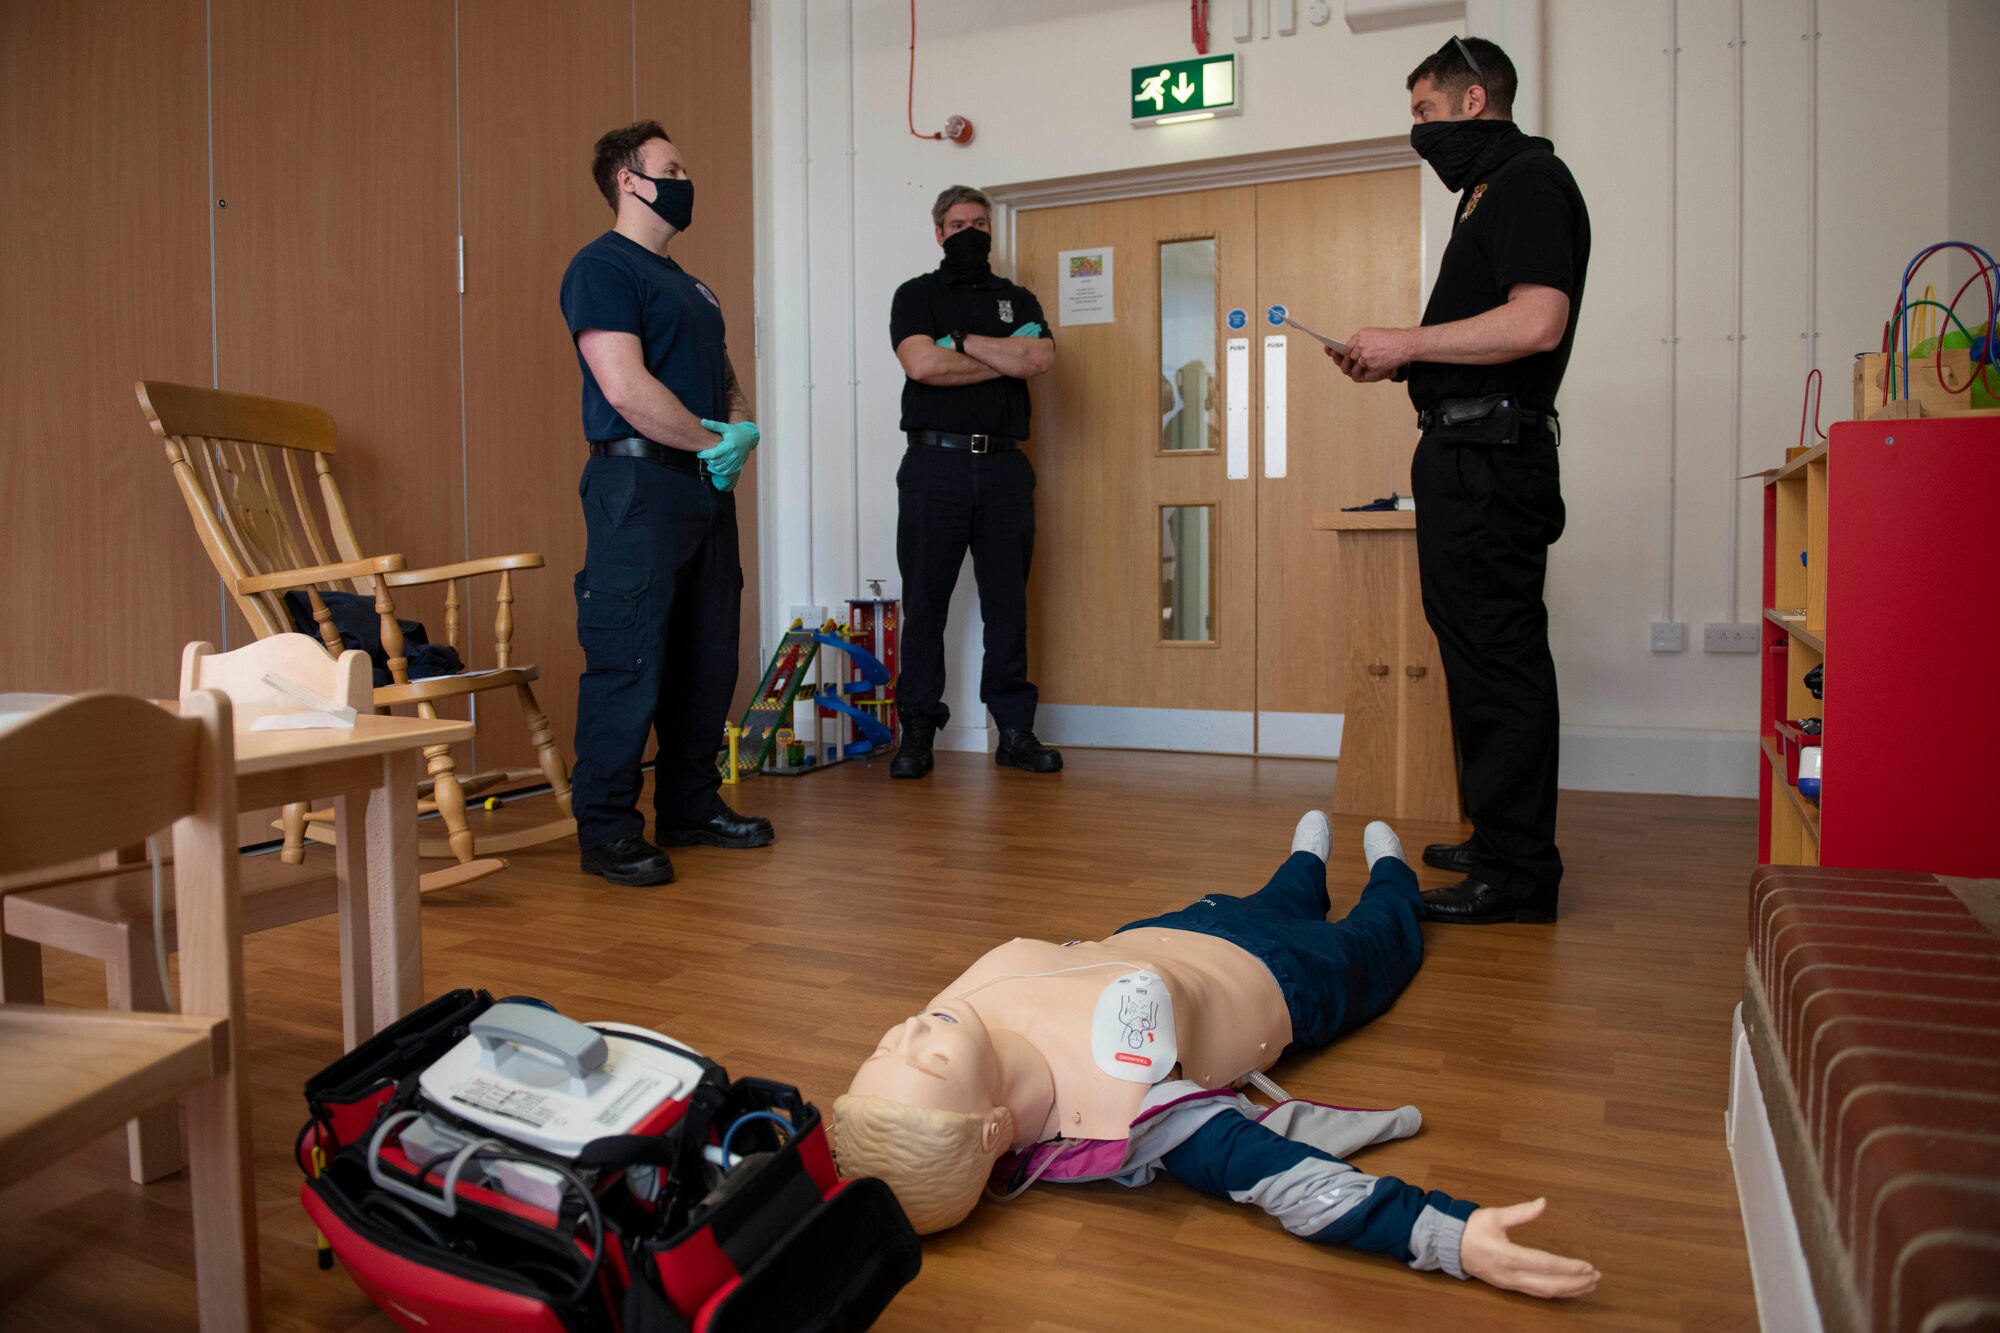 Tom Reynolds, left, 423rd Civil Engineer Squadron firefighter, prepares to perform CPR and automated external defibrillator assessment on a simulated patient during an EMT practical application exam at Royal Air Force Croughton, England, March 31, 2021. U.K. firefighters across the 501st Combat Support Wing were tested in a practical application of their knowledge and skills, after attending over 280 hours of the U.S. National Registry of Emergency Medical Technicians course. The primary mission of the course was to prepare the fire department to respond to medical emergencies, as EMTs assume the responsibility of operating the ambulances and transporting patients to medical facilities. (U.S. Air Force photo by Senior Airman Jennifer Zima)